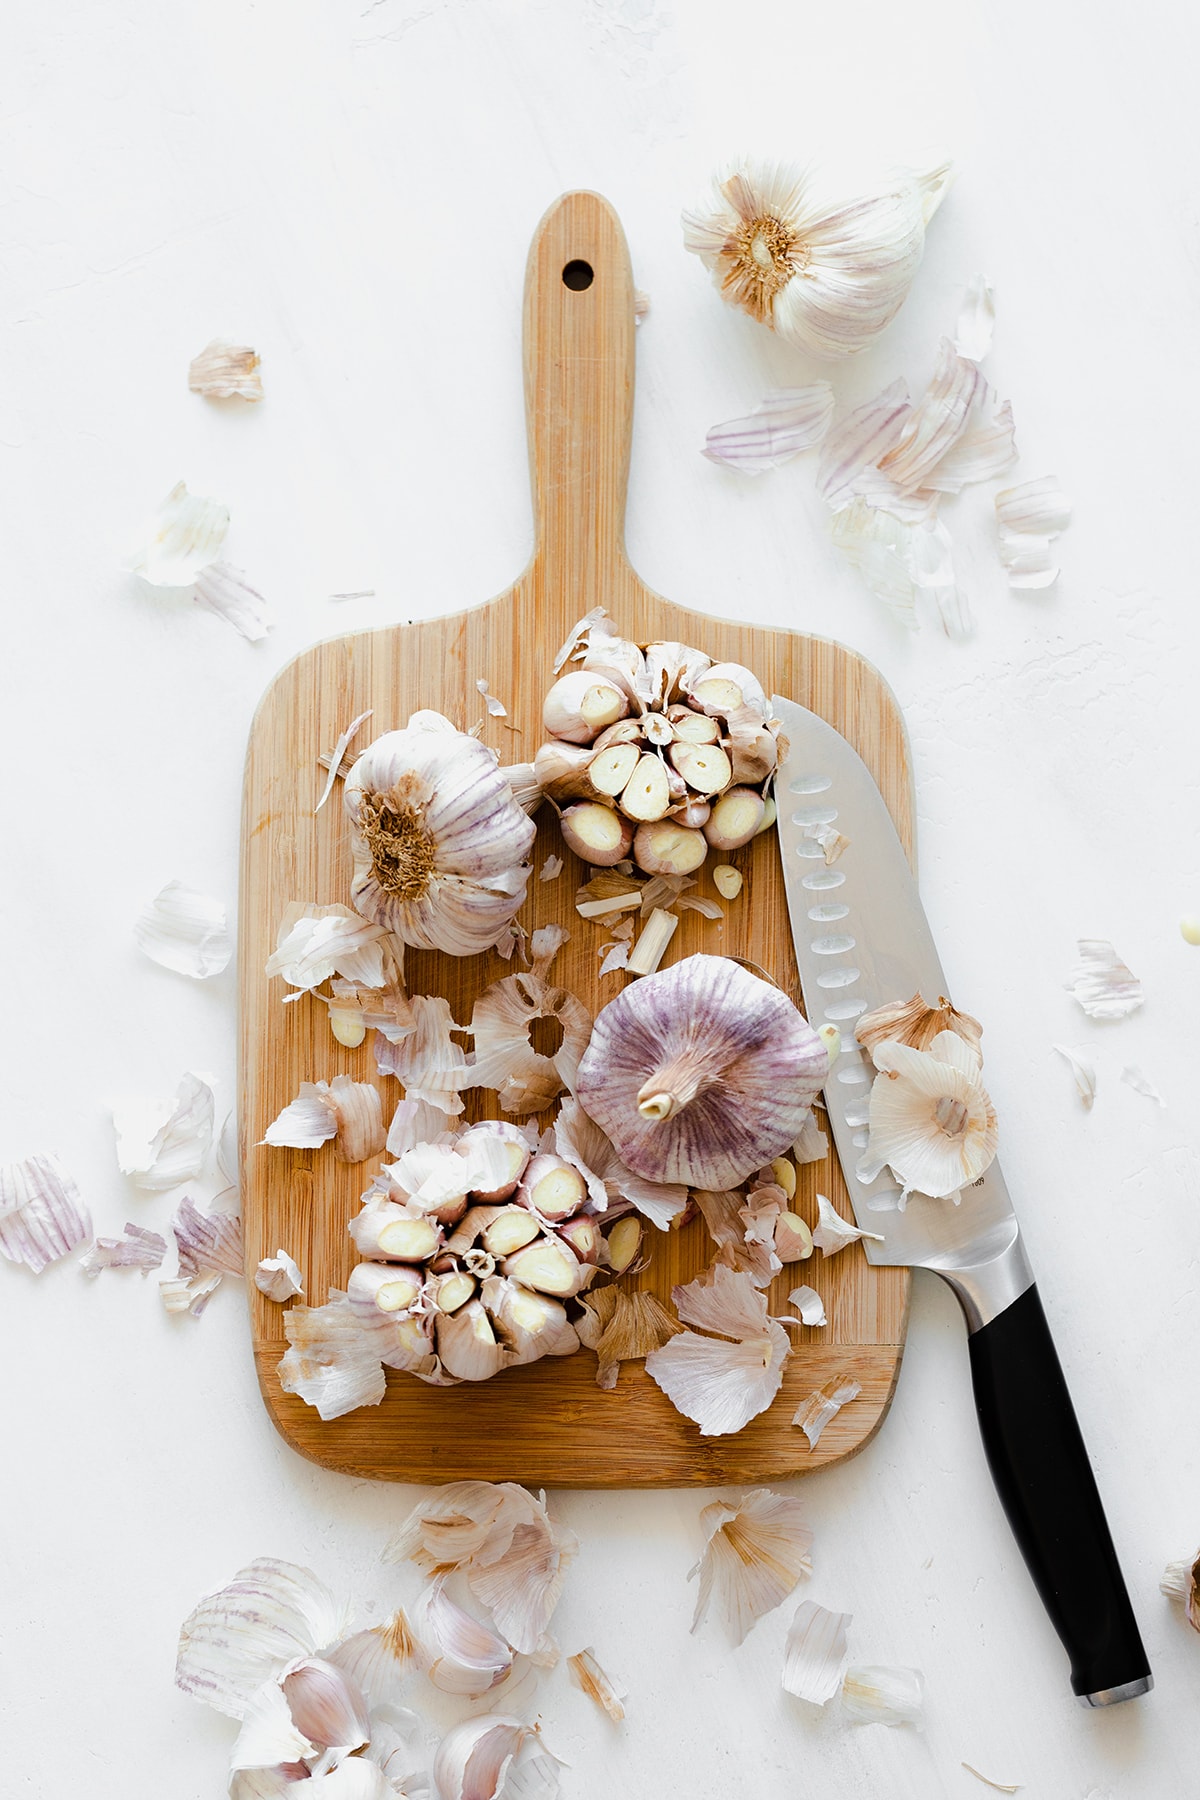 A photo of 4 garlic bulbs, two with the tops cut off, on a wooden cutting board with the knife of the right side of it. On a white background.